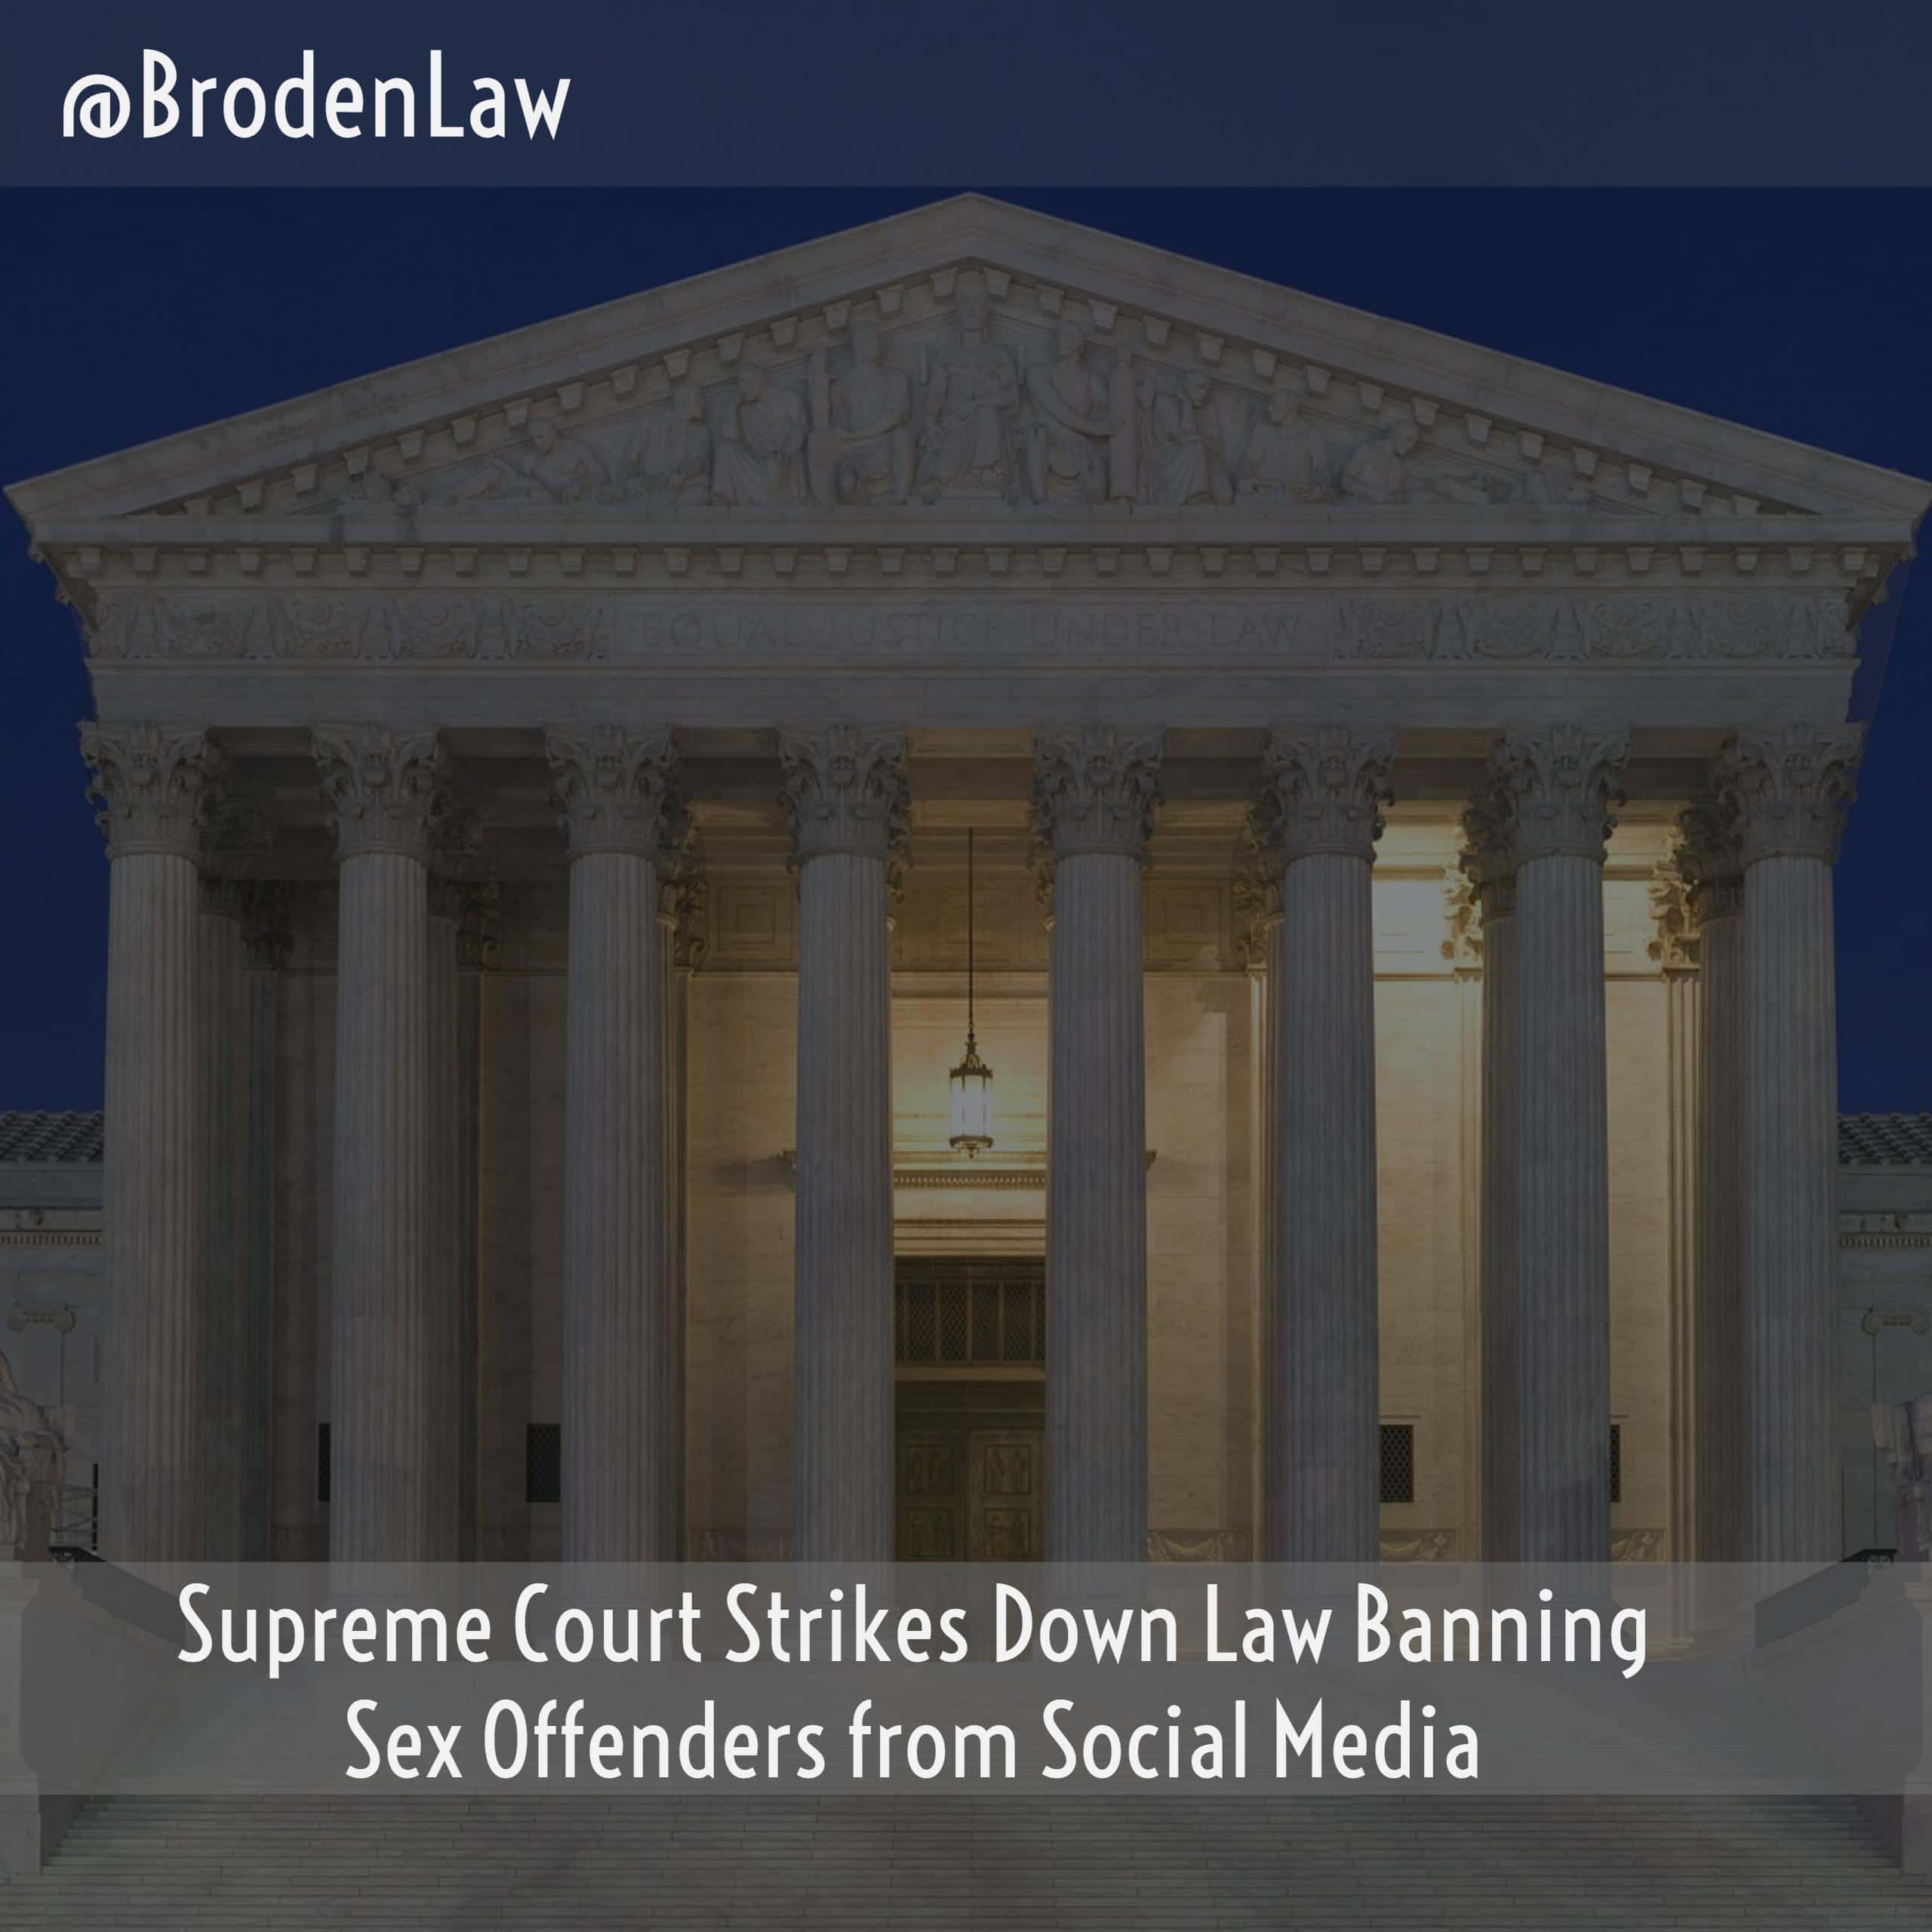 Supreme Court Strikes Down Law Banning Sex Offenders from Social Media